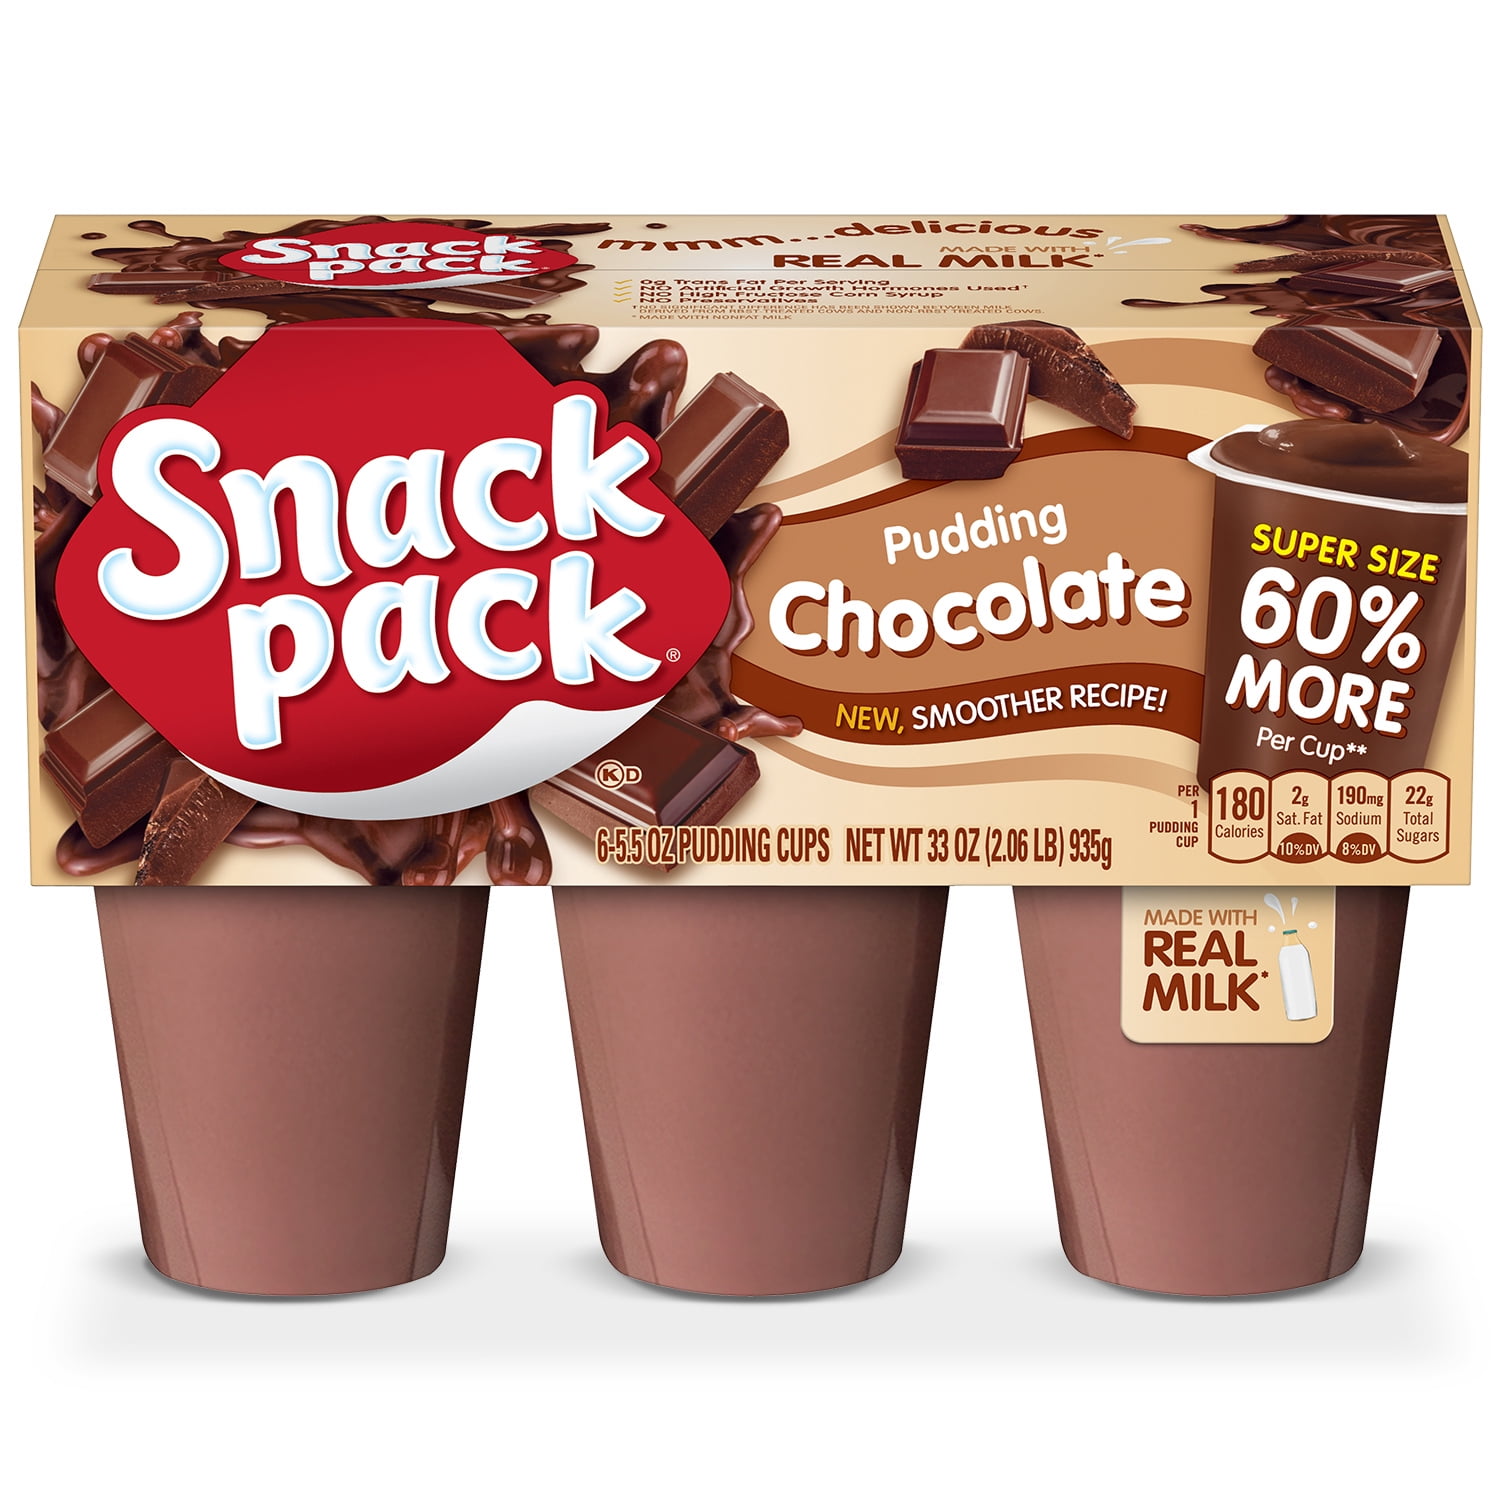 snack-pack-chocolate-flavored-pudding-6-count-pudding-cups-8-pack